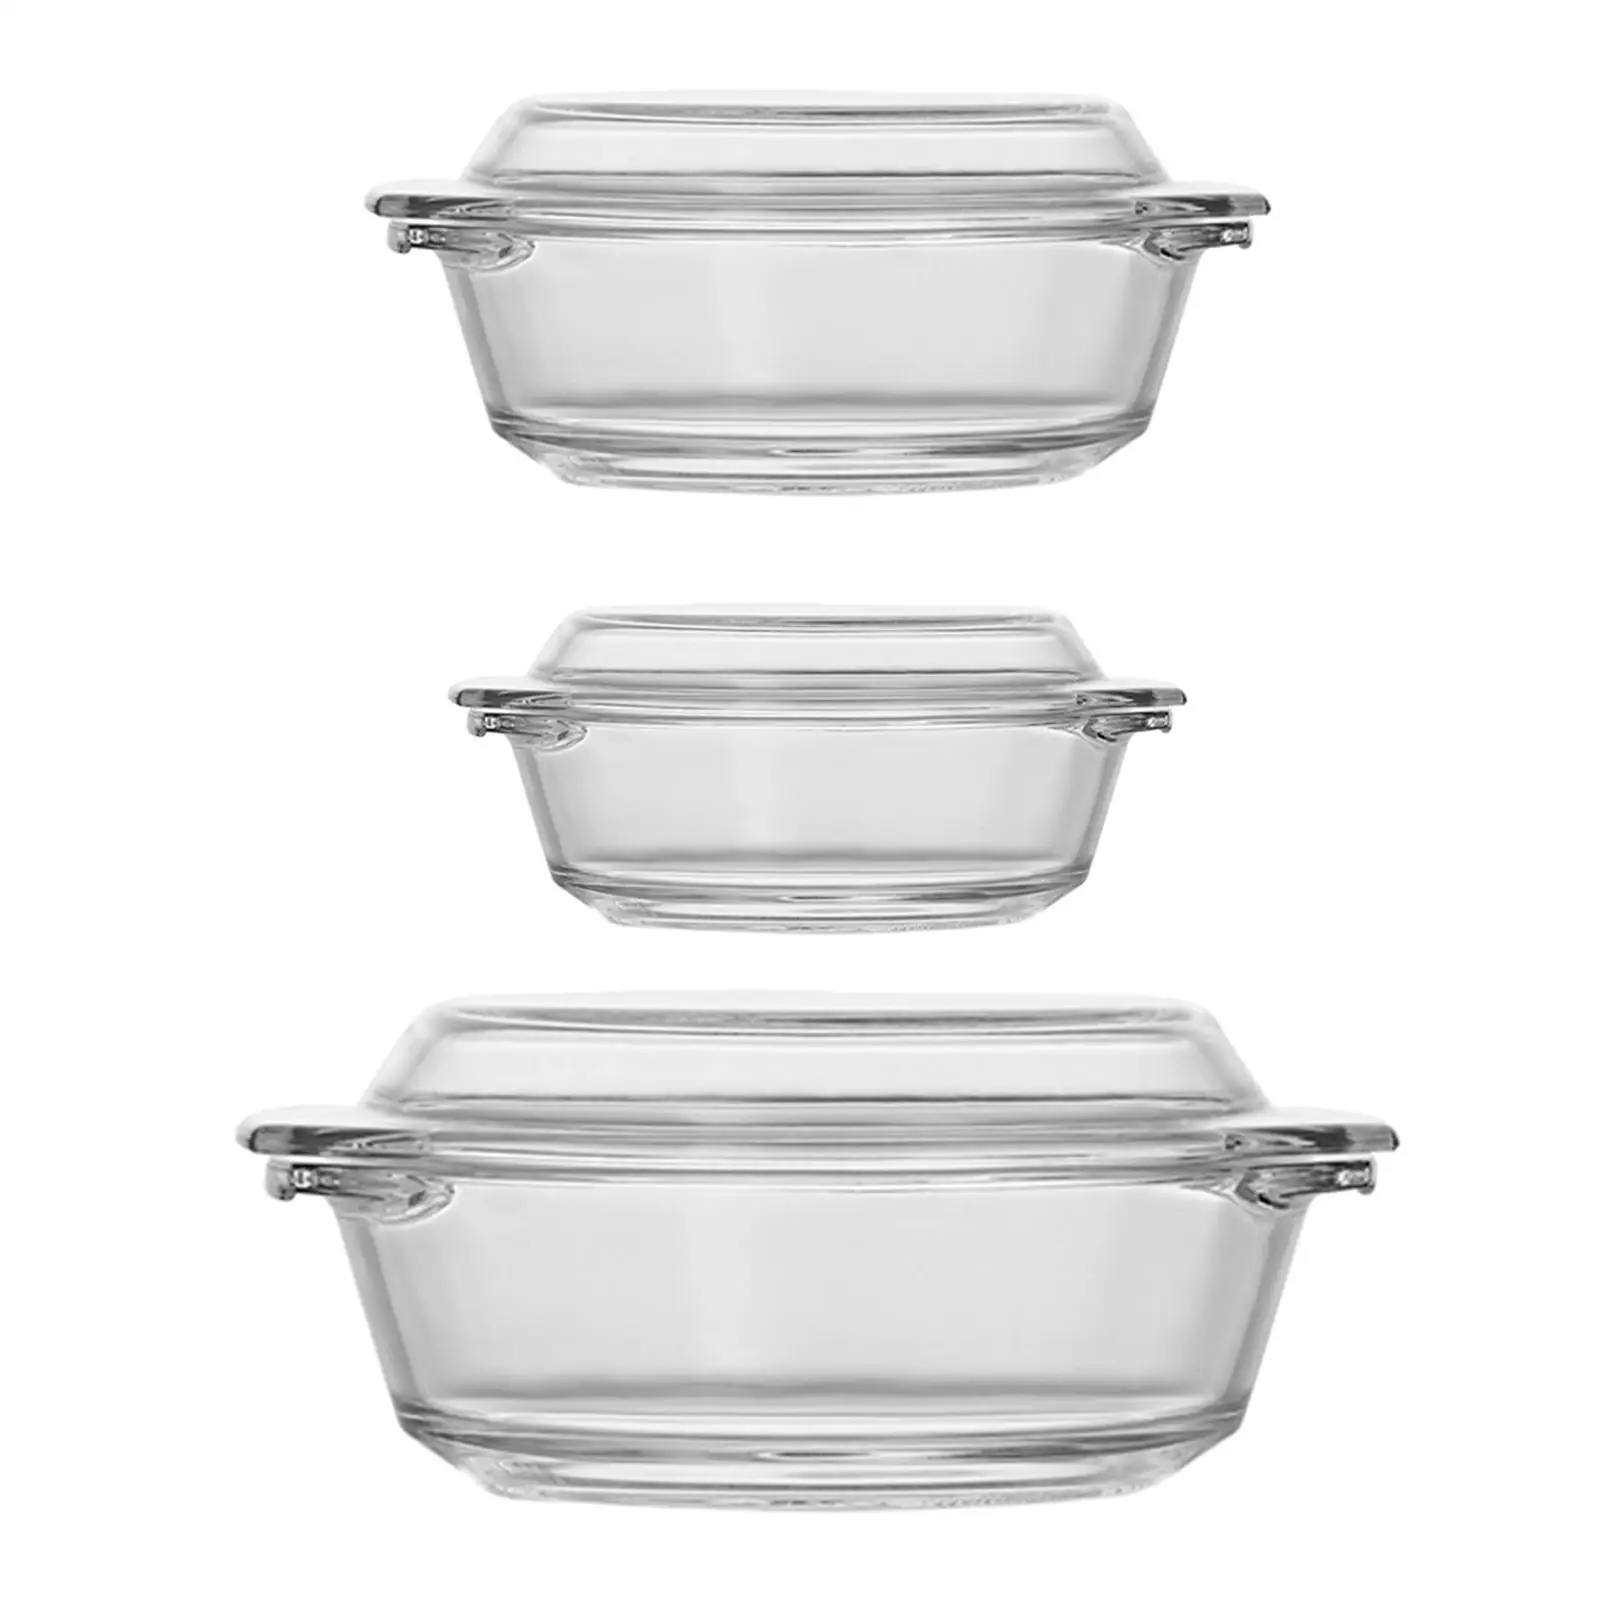 Glass Cereal Bowls with Handles with Lid Soup Bowl for Noodles Pasta Milk